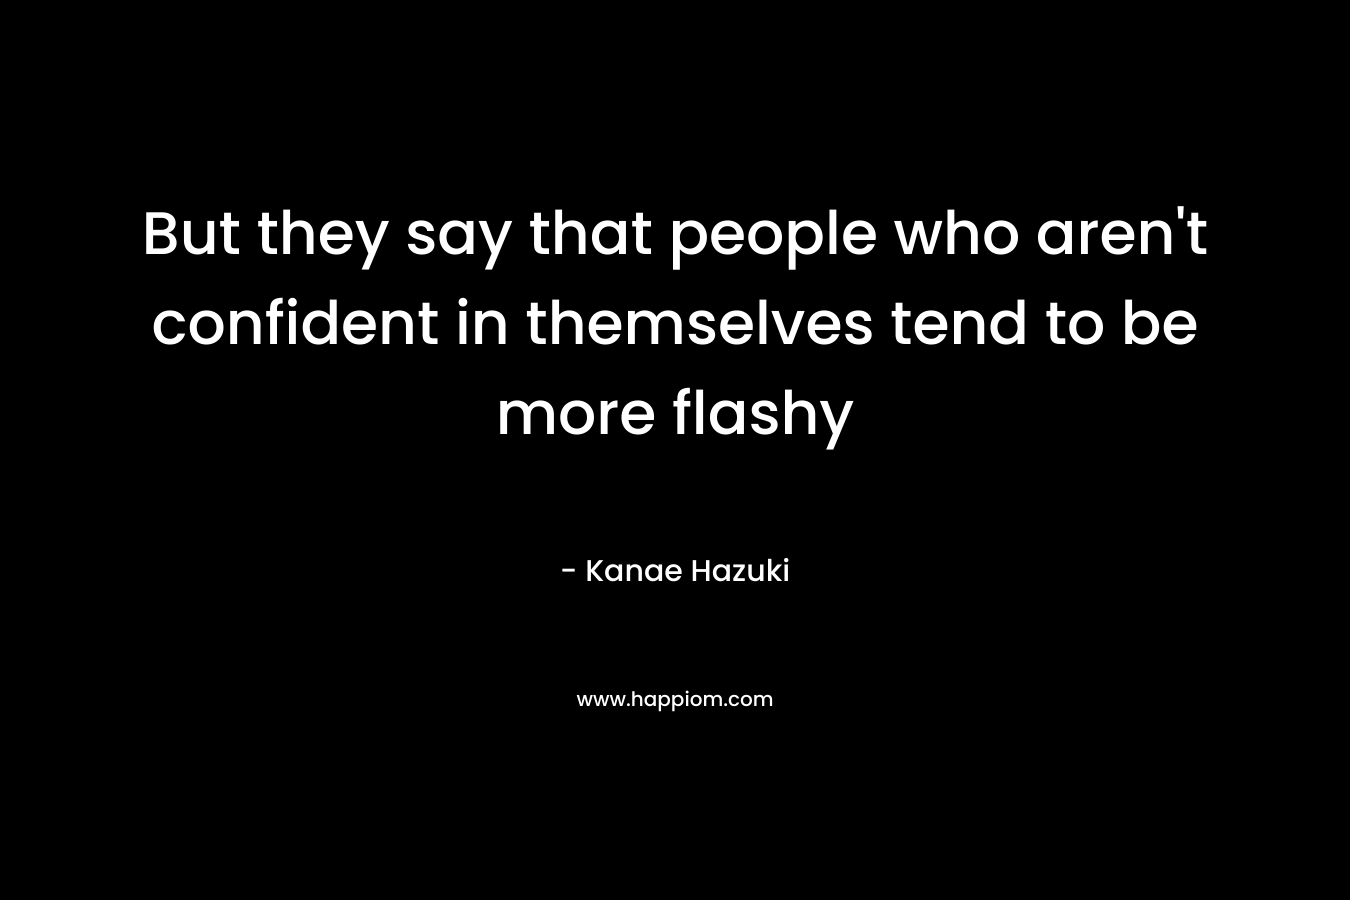 But they say that people who aren’t confident in themselves tend to be more flashy – Kanae Hazuki